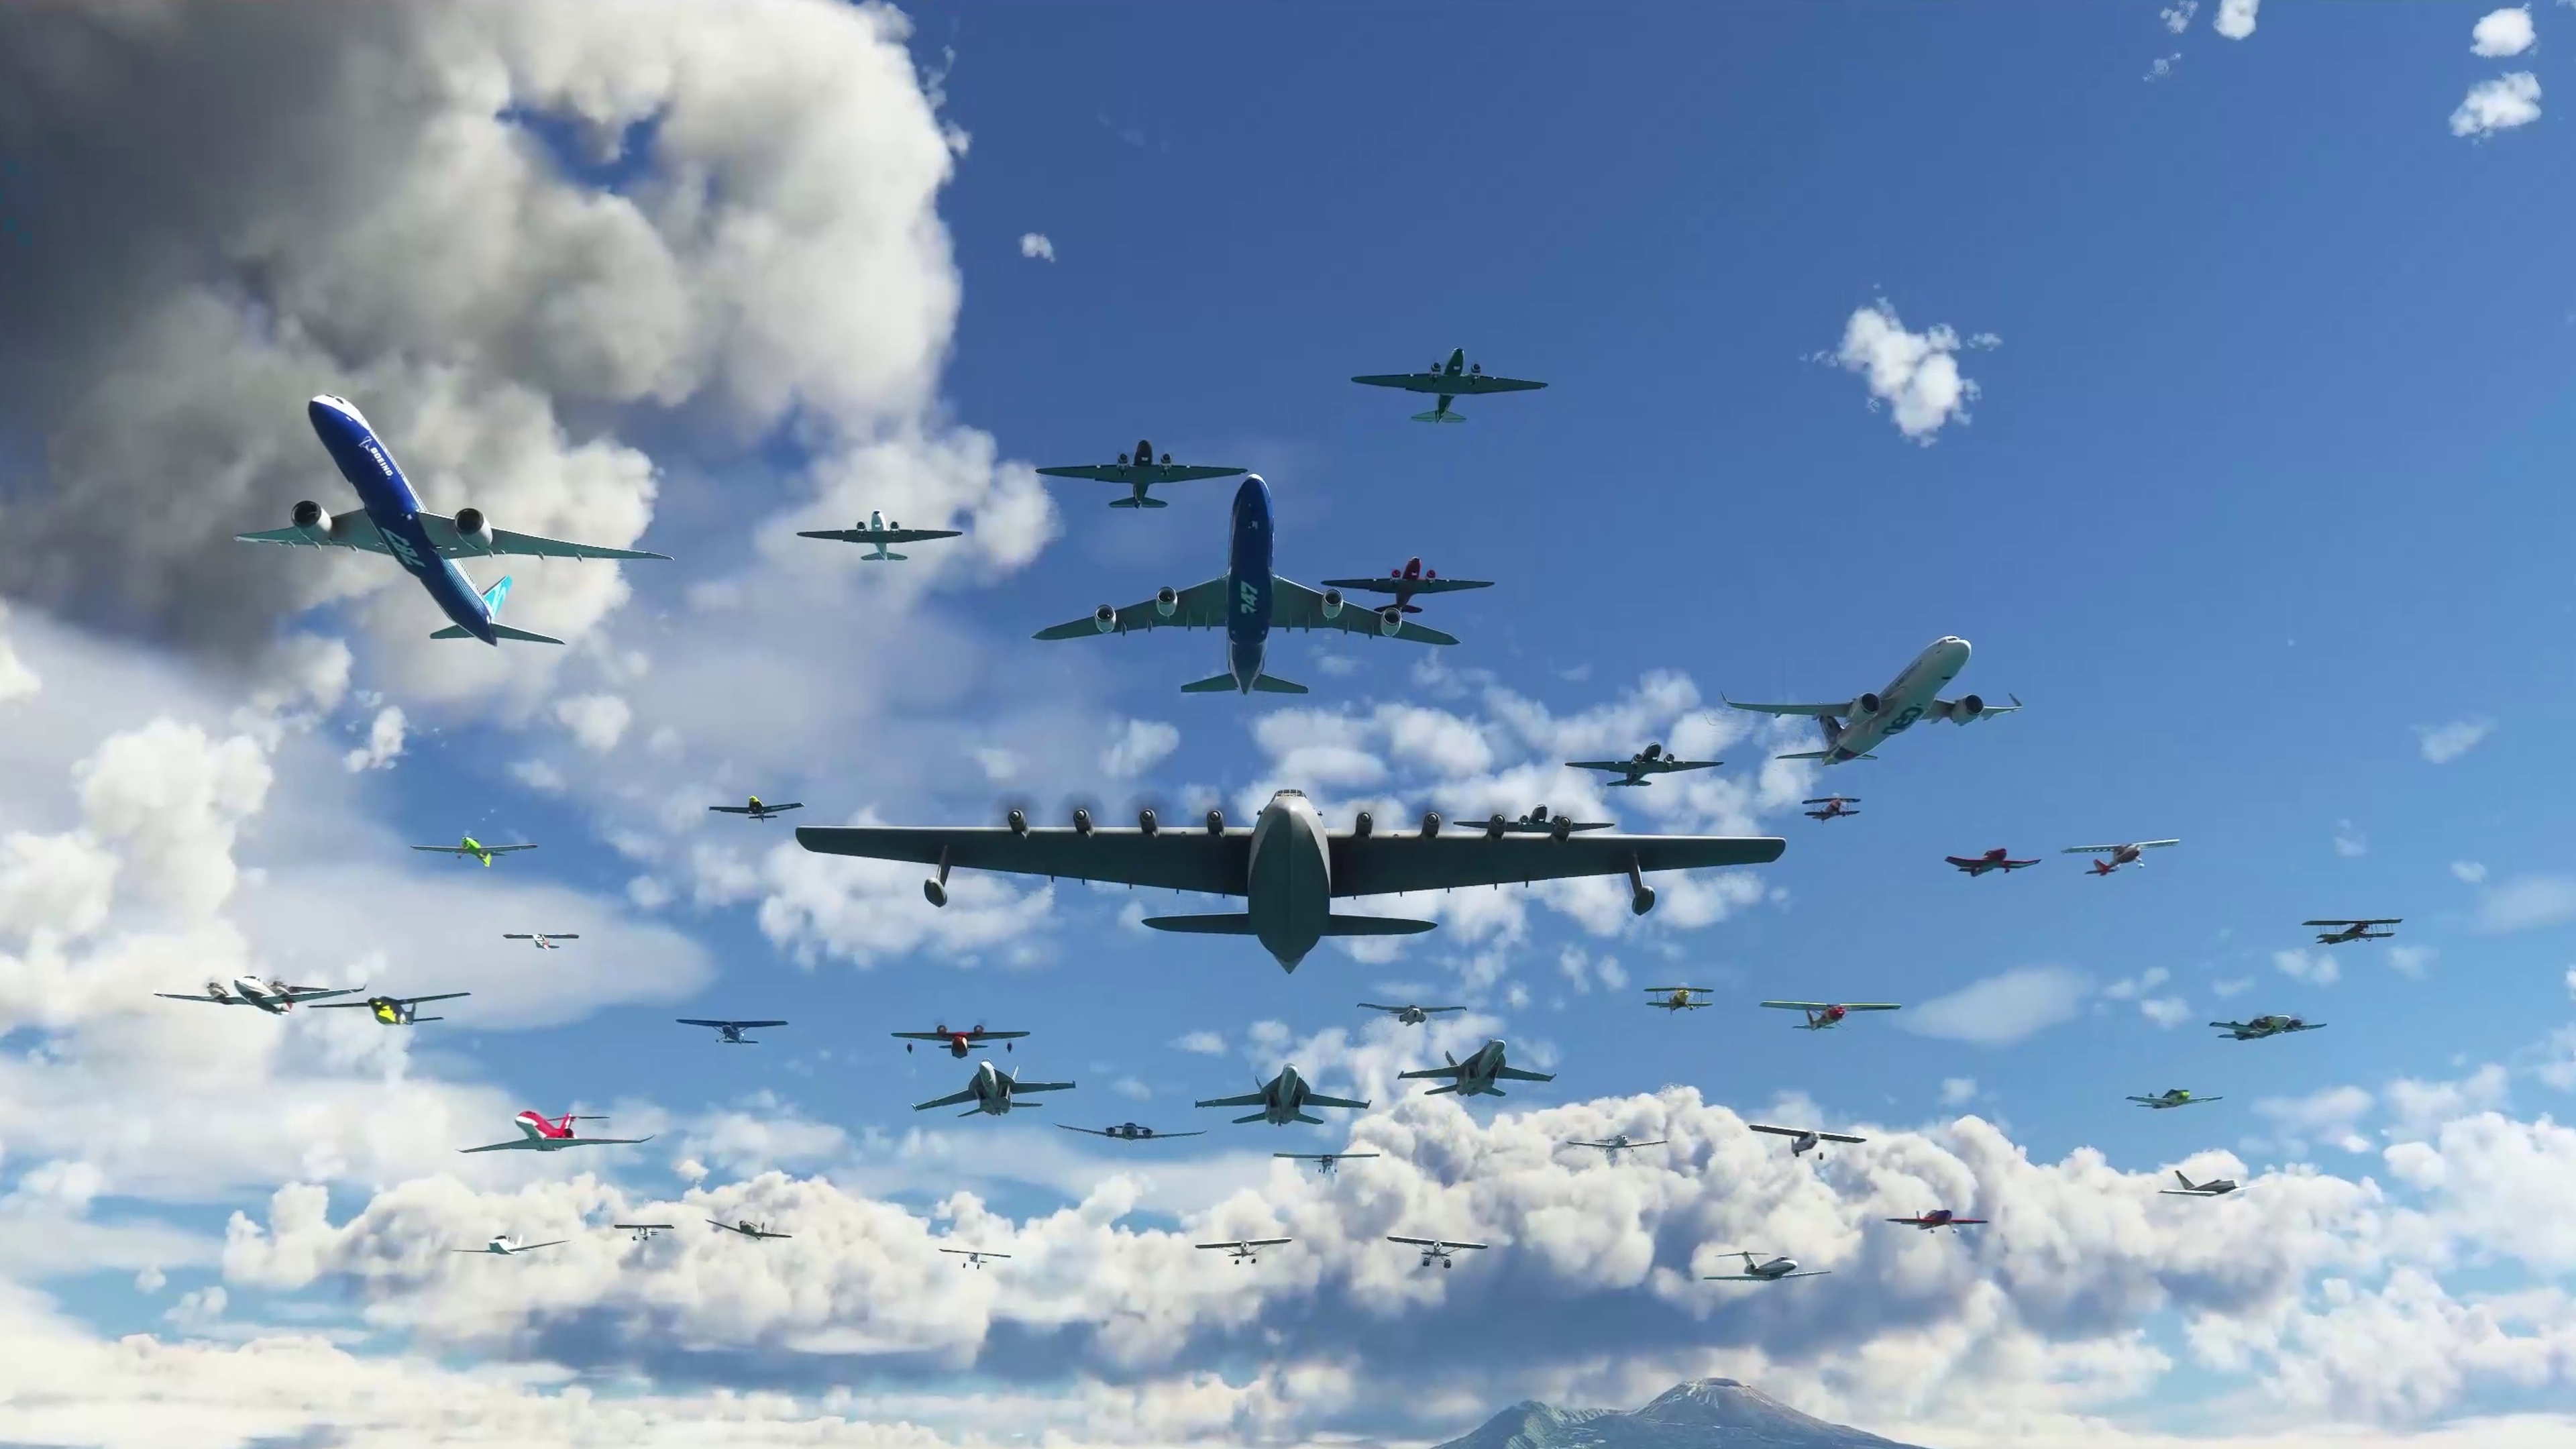 Microsoft's Flight Simulator gets helicopters, gliders, and Spruce Goose